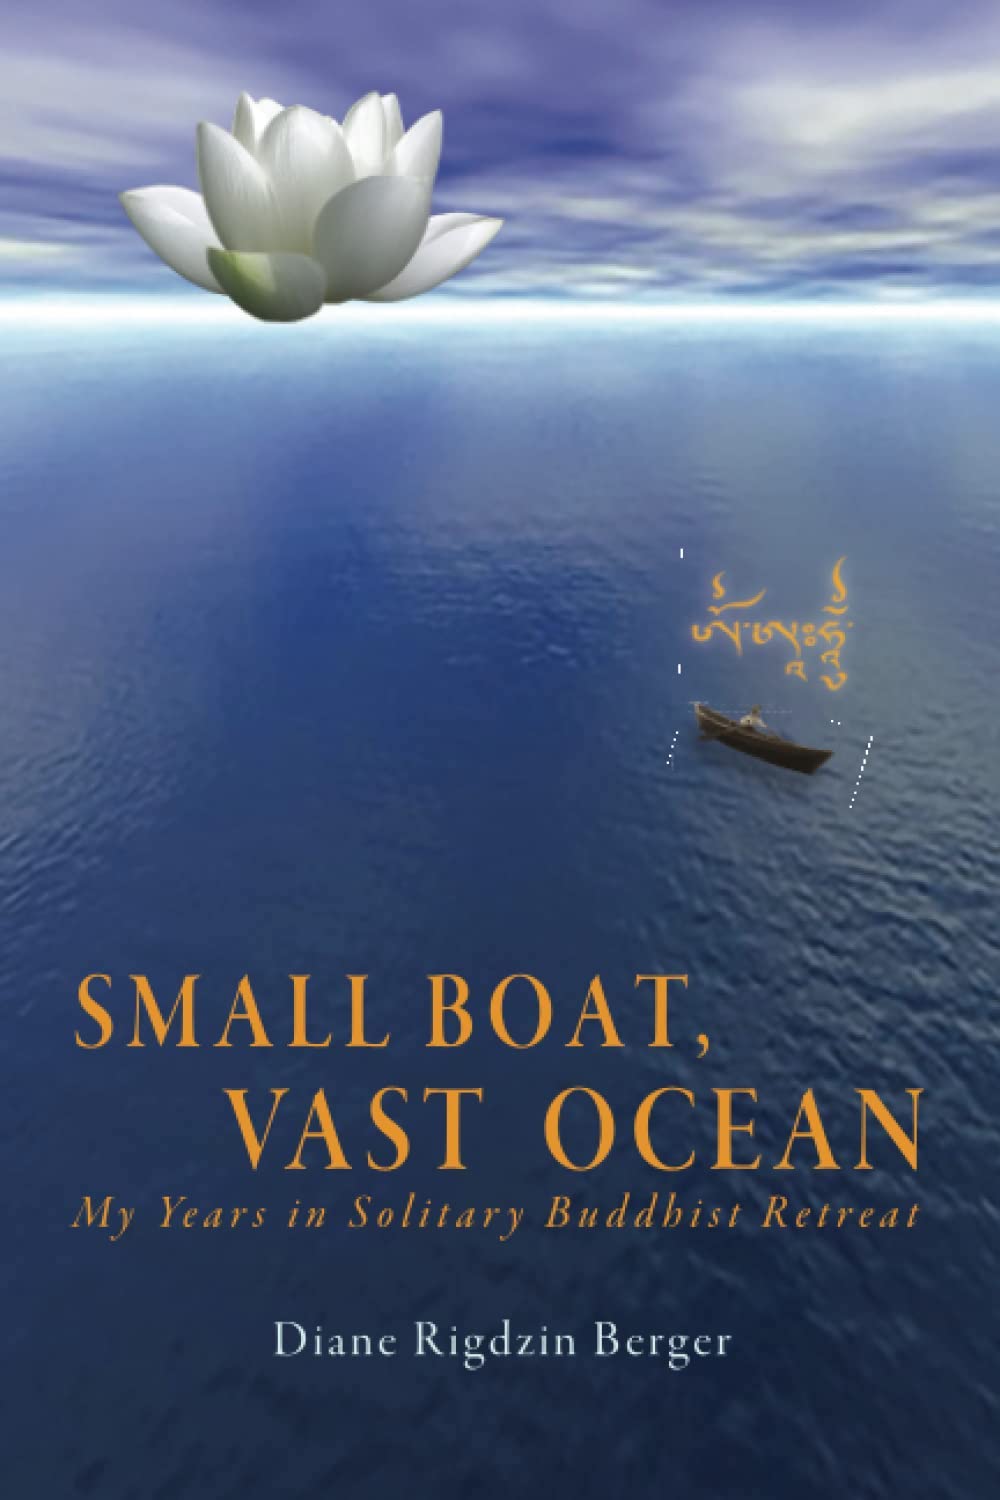 Review of ‘Small Boat, Vast Ocean: My Years in Solitary Buddhist Retreat’